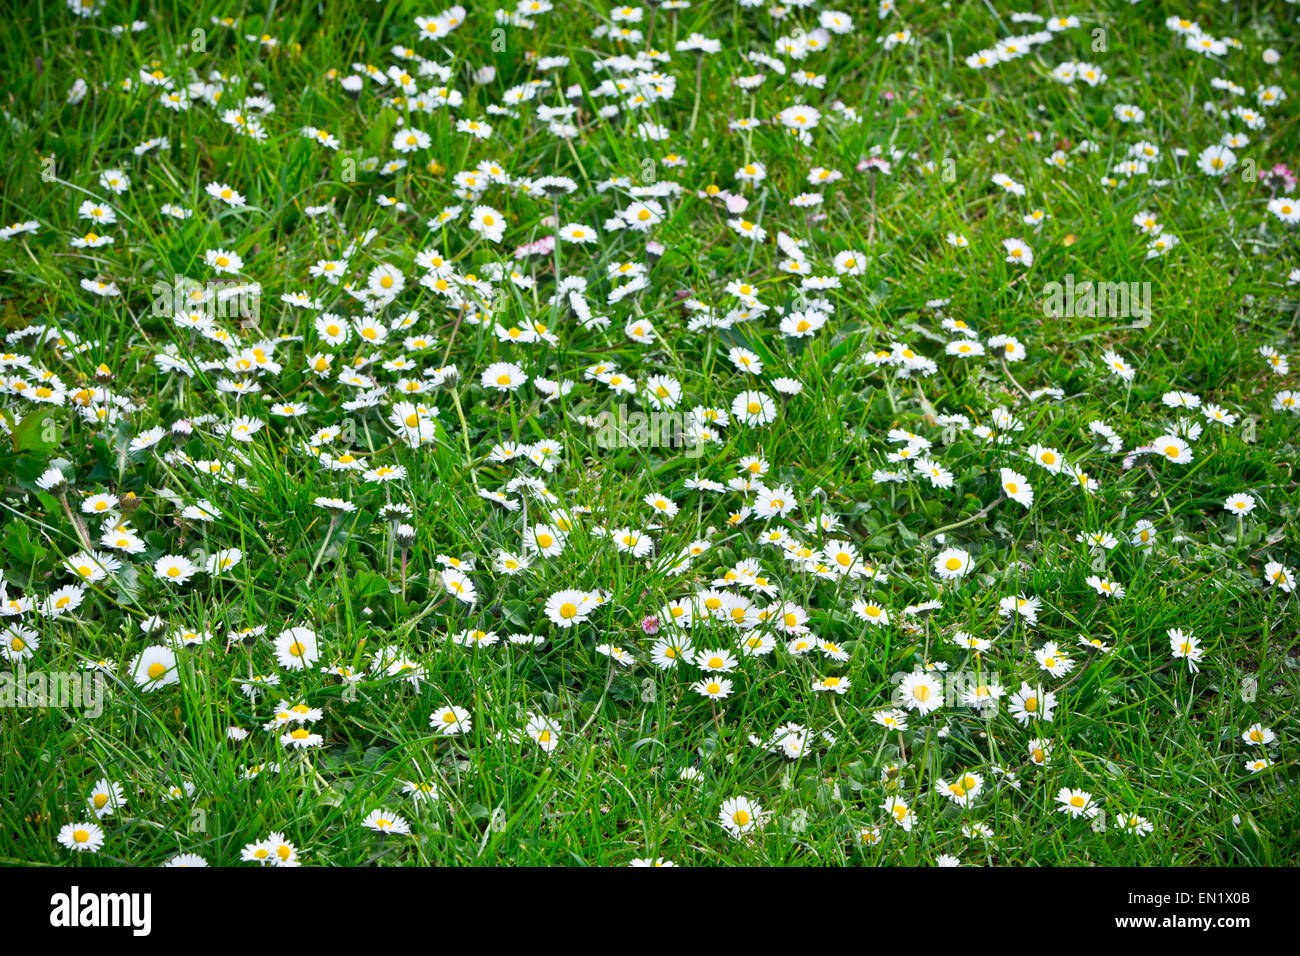 Daisy flowers in grass lawn daisies Stock Photo